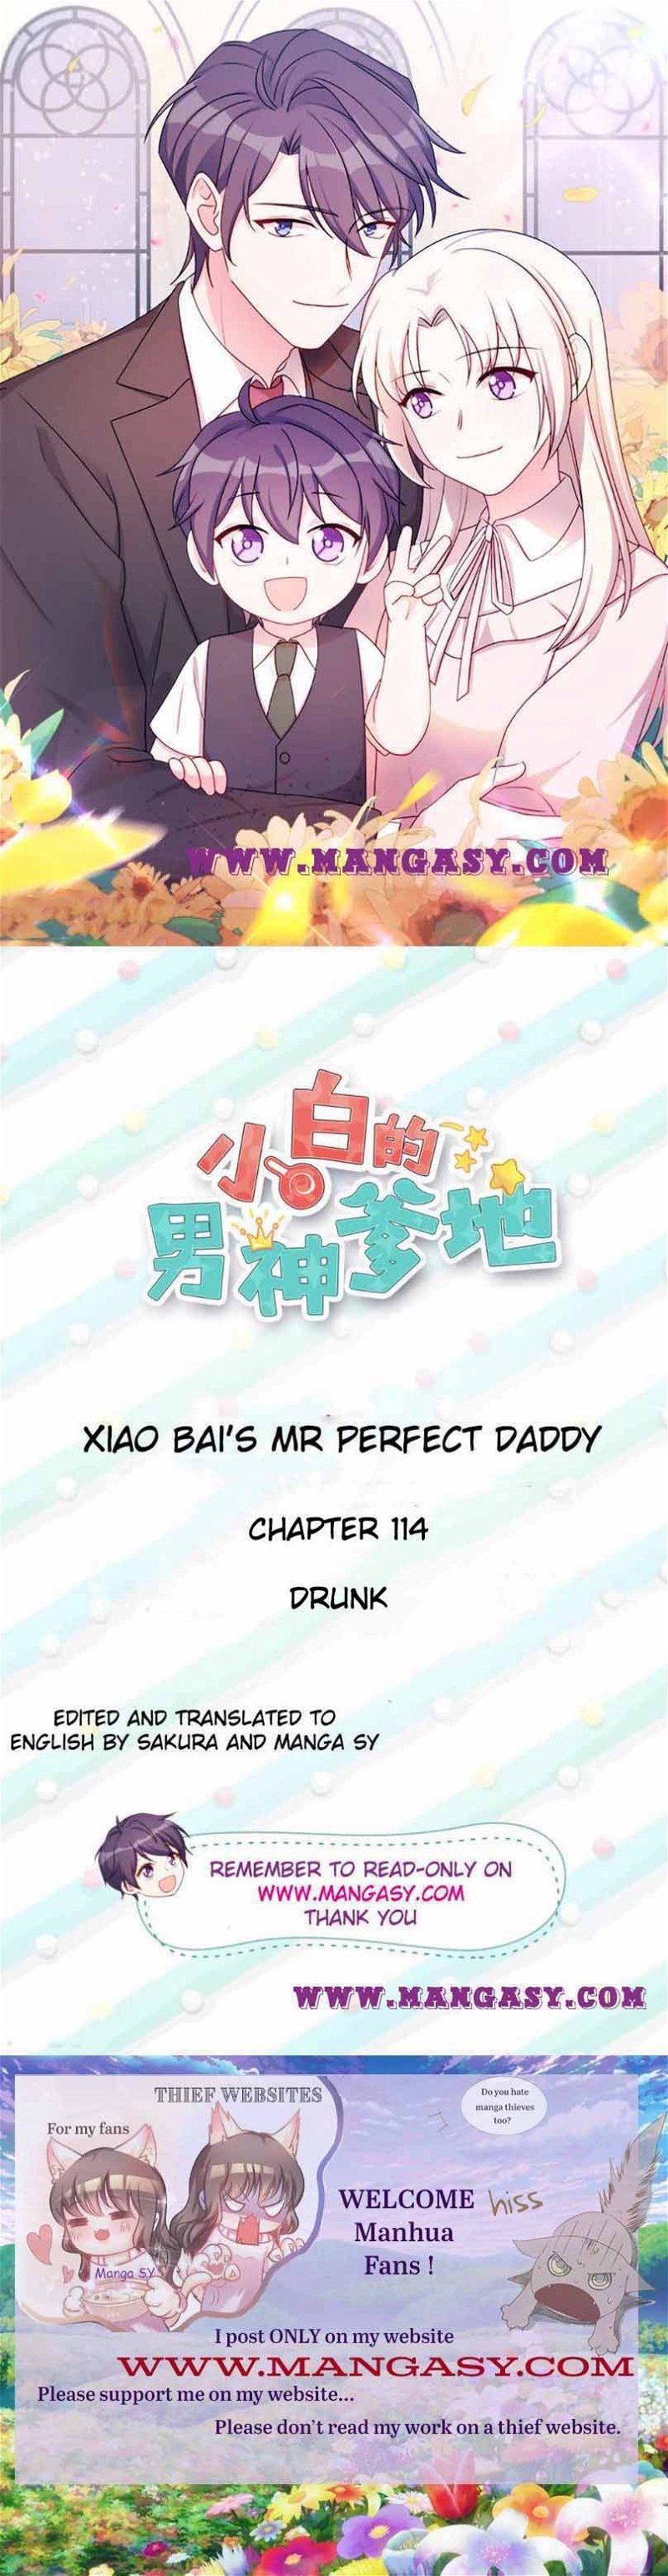 Xiao Bai’s father is a wonderful person Chapter 114 - Page 0